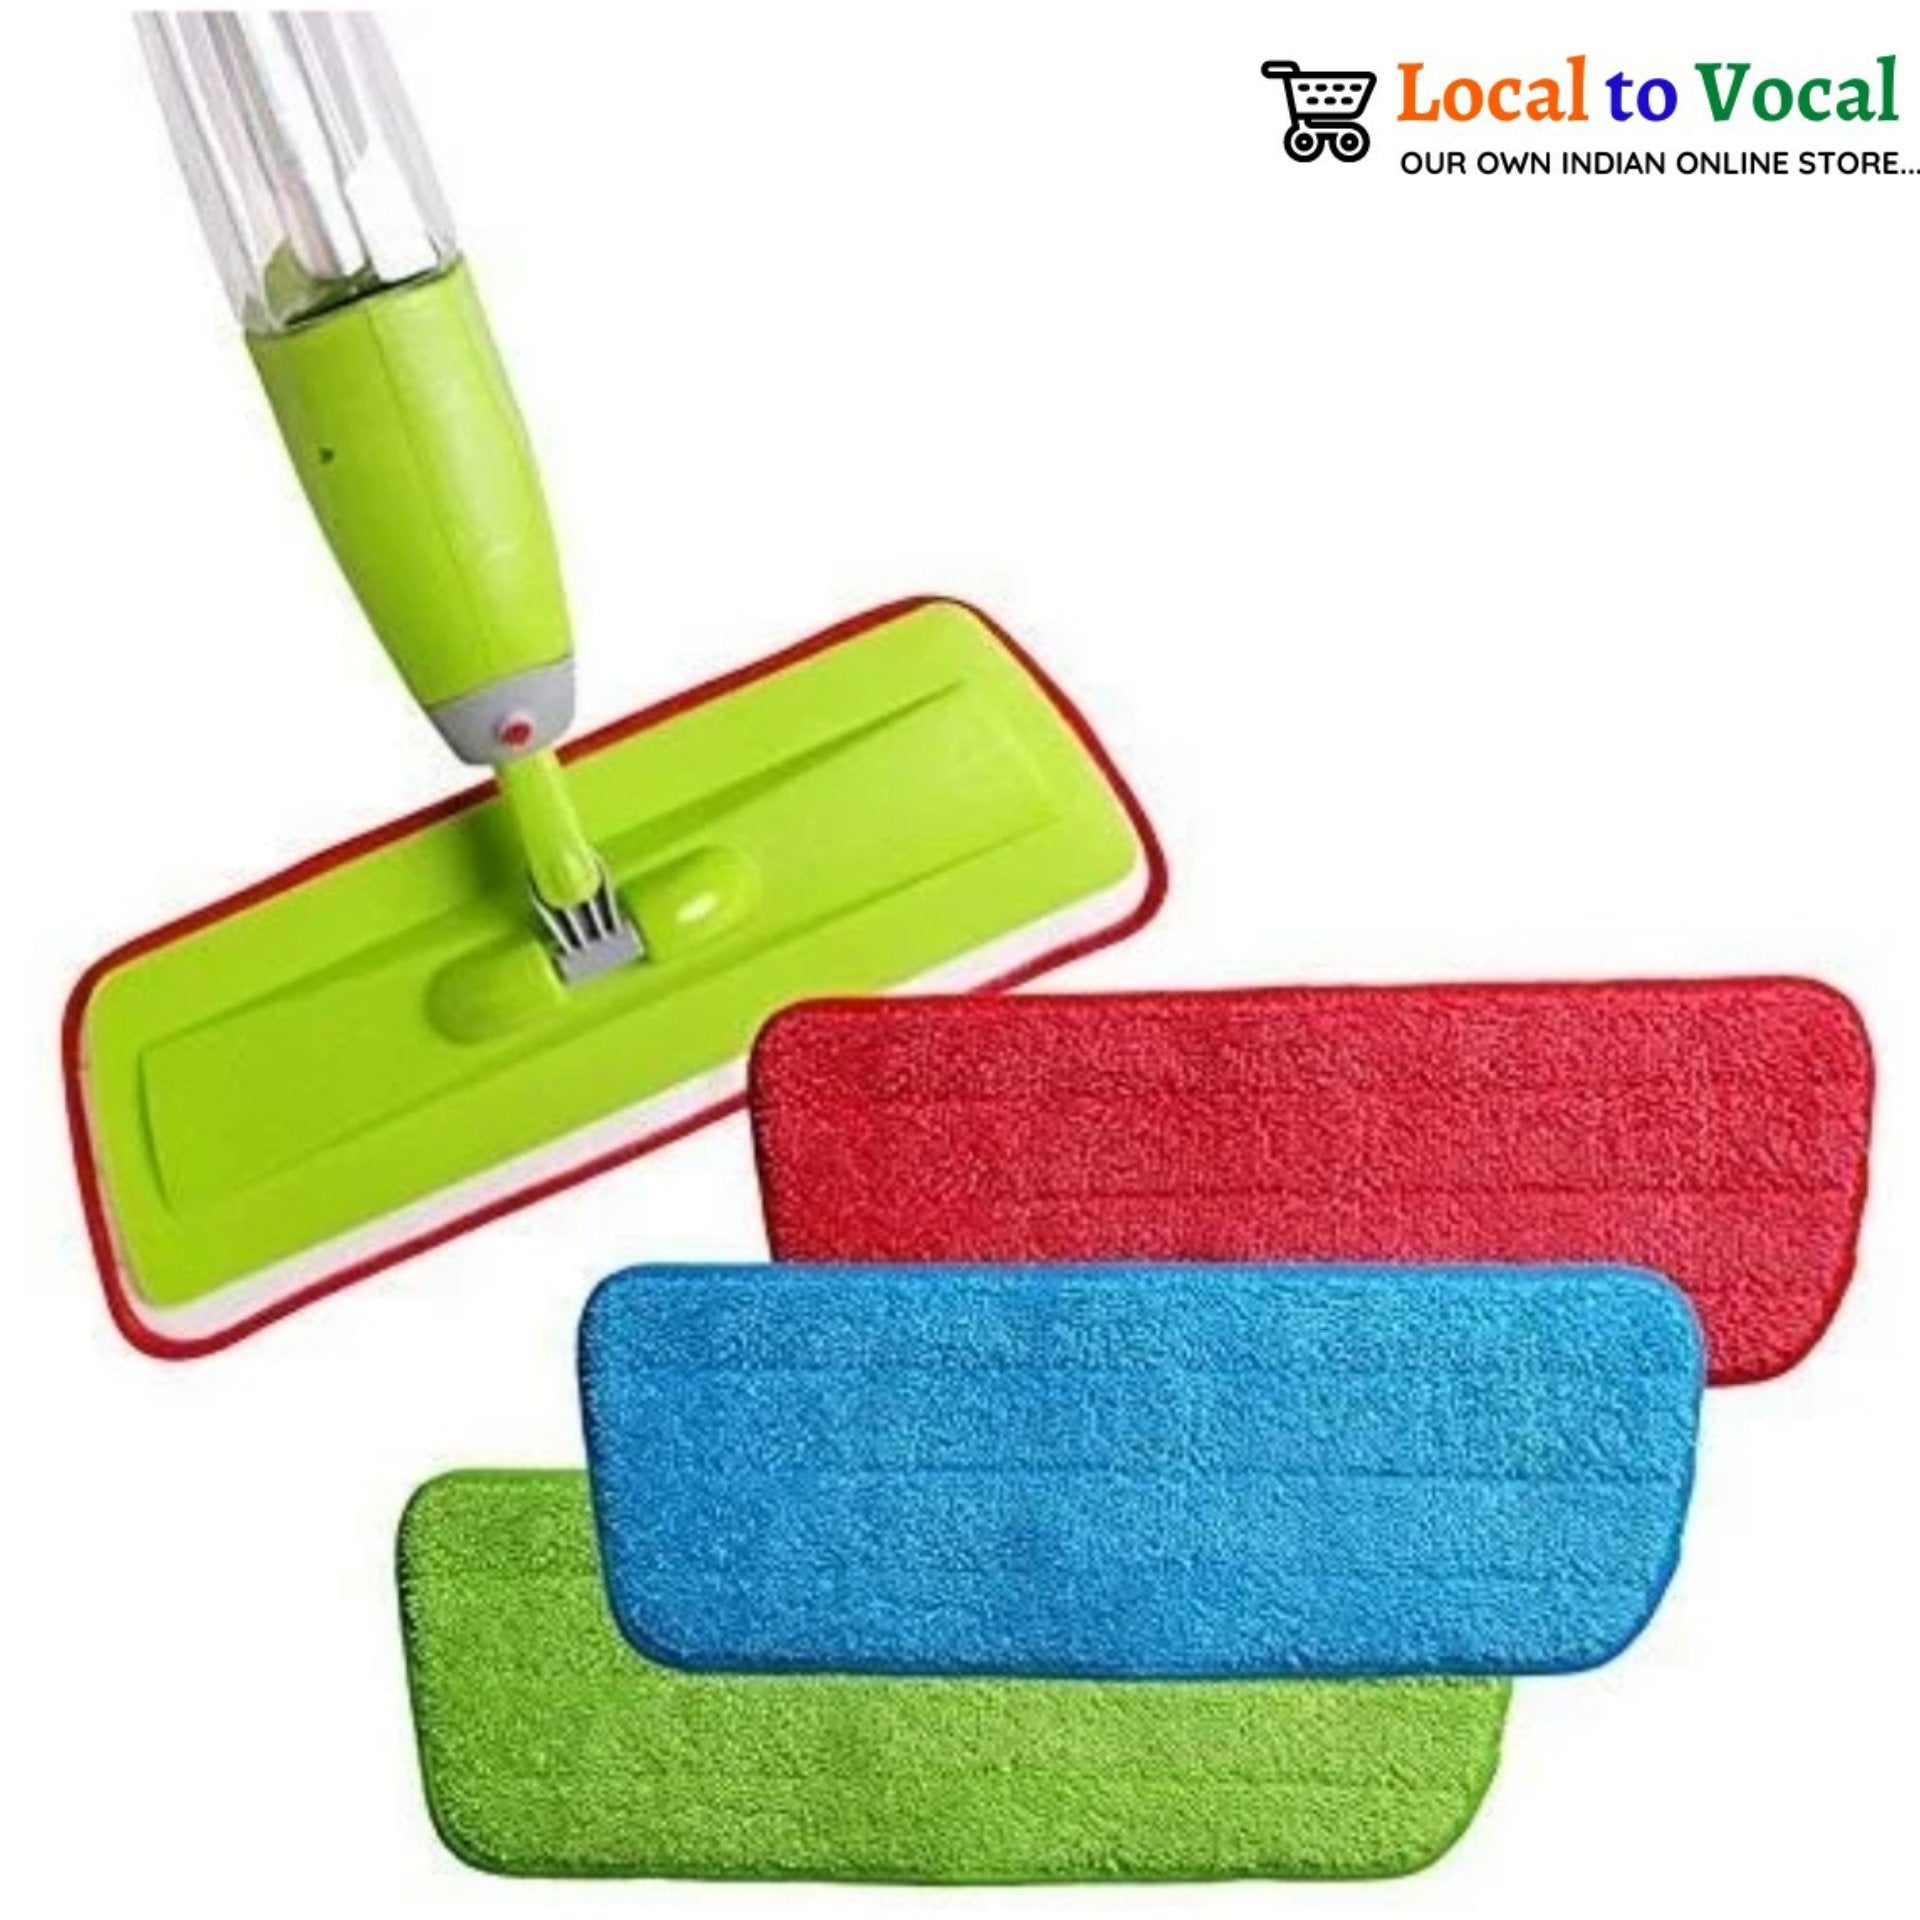 Magic Spray Mop Extra Pads ( Pack of 3) - Local to Vocal